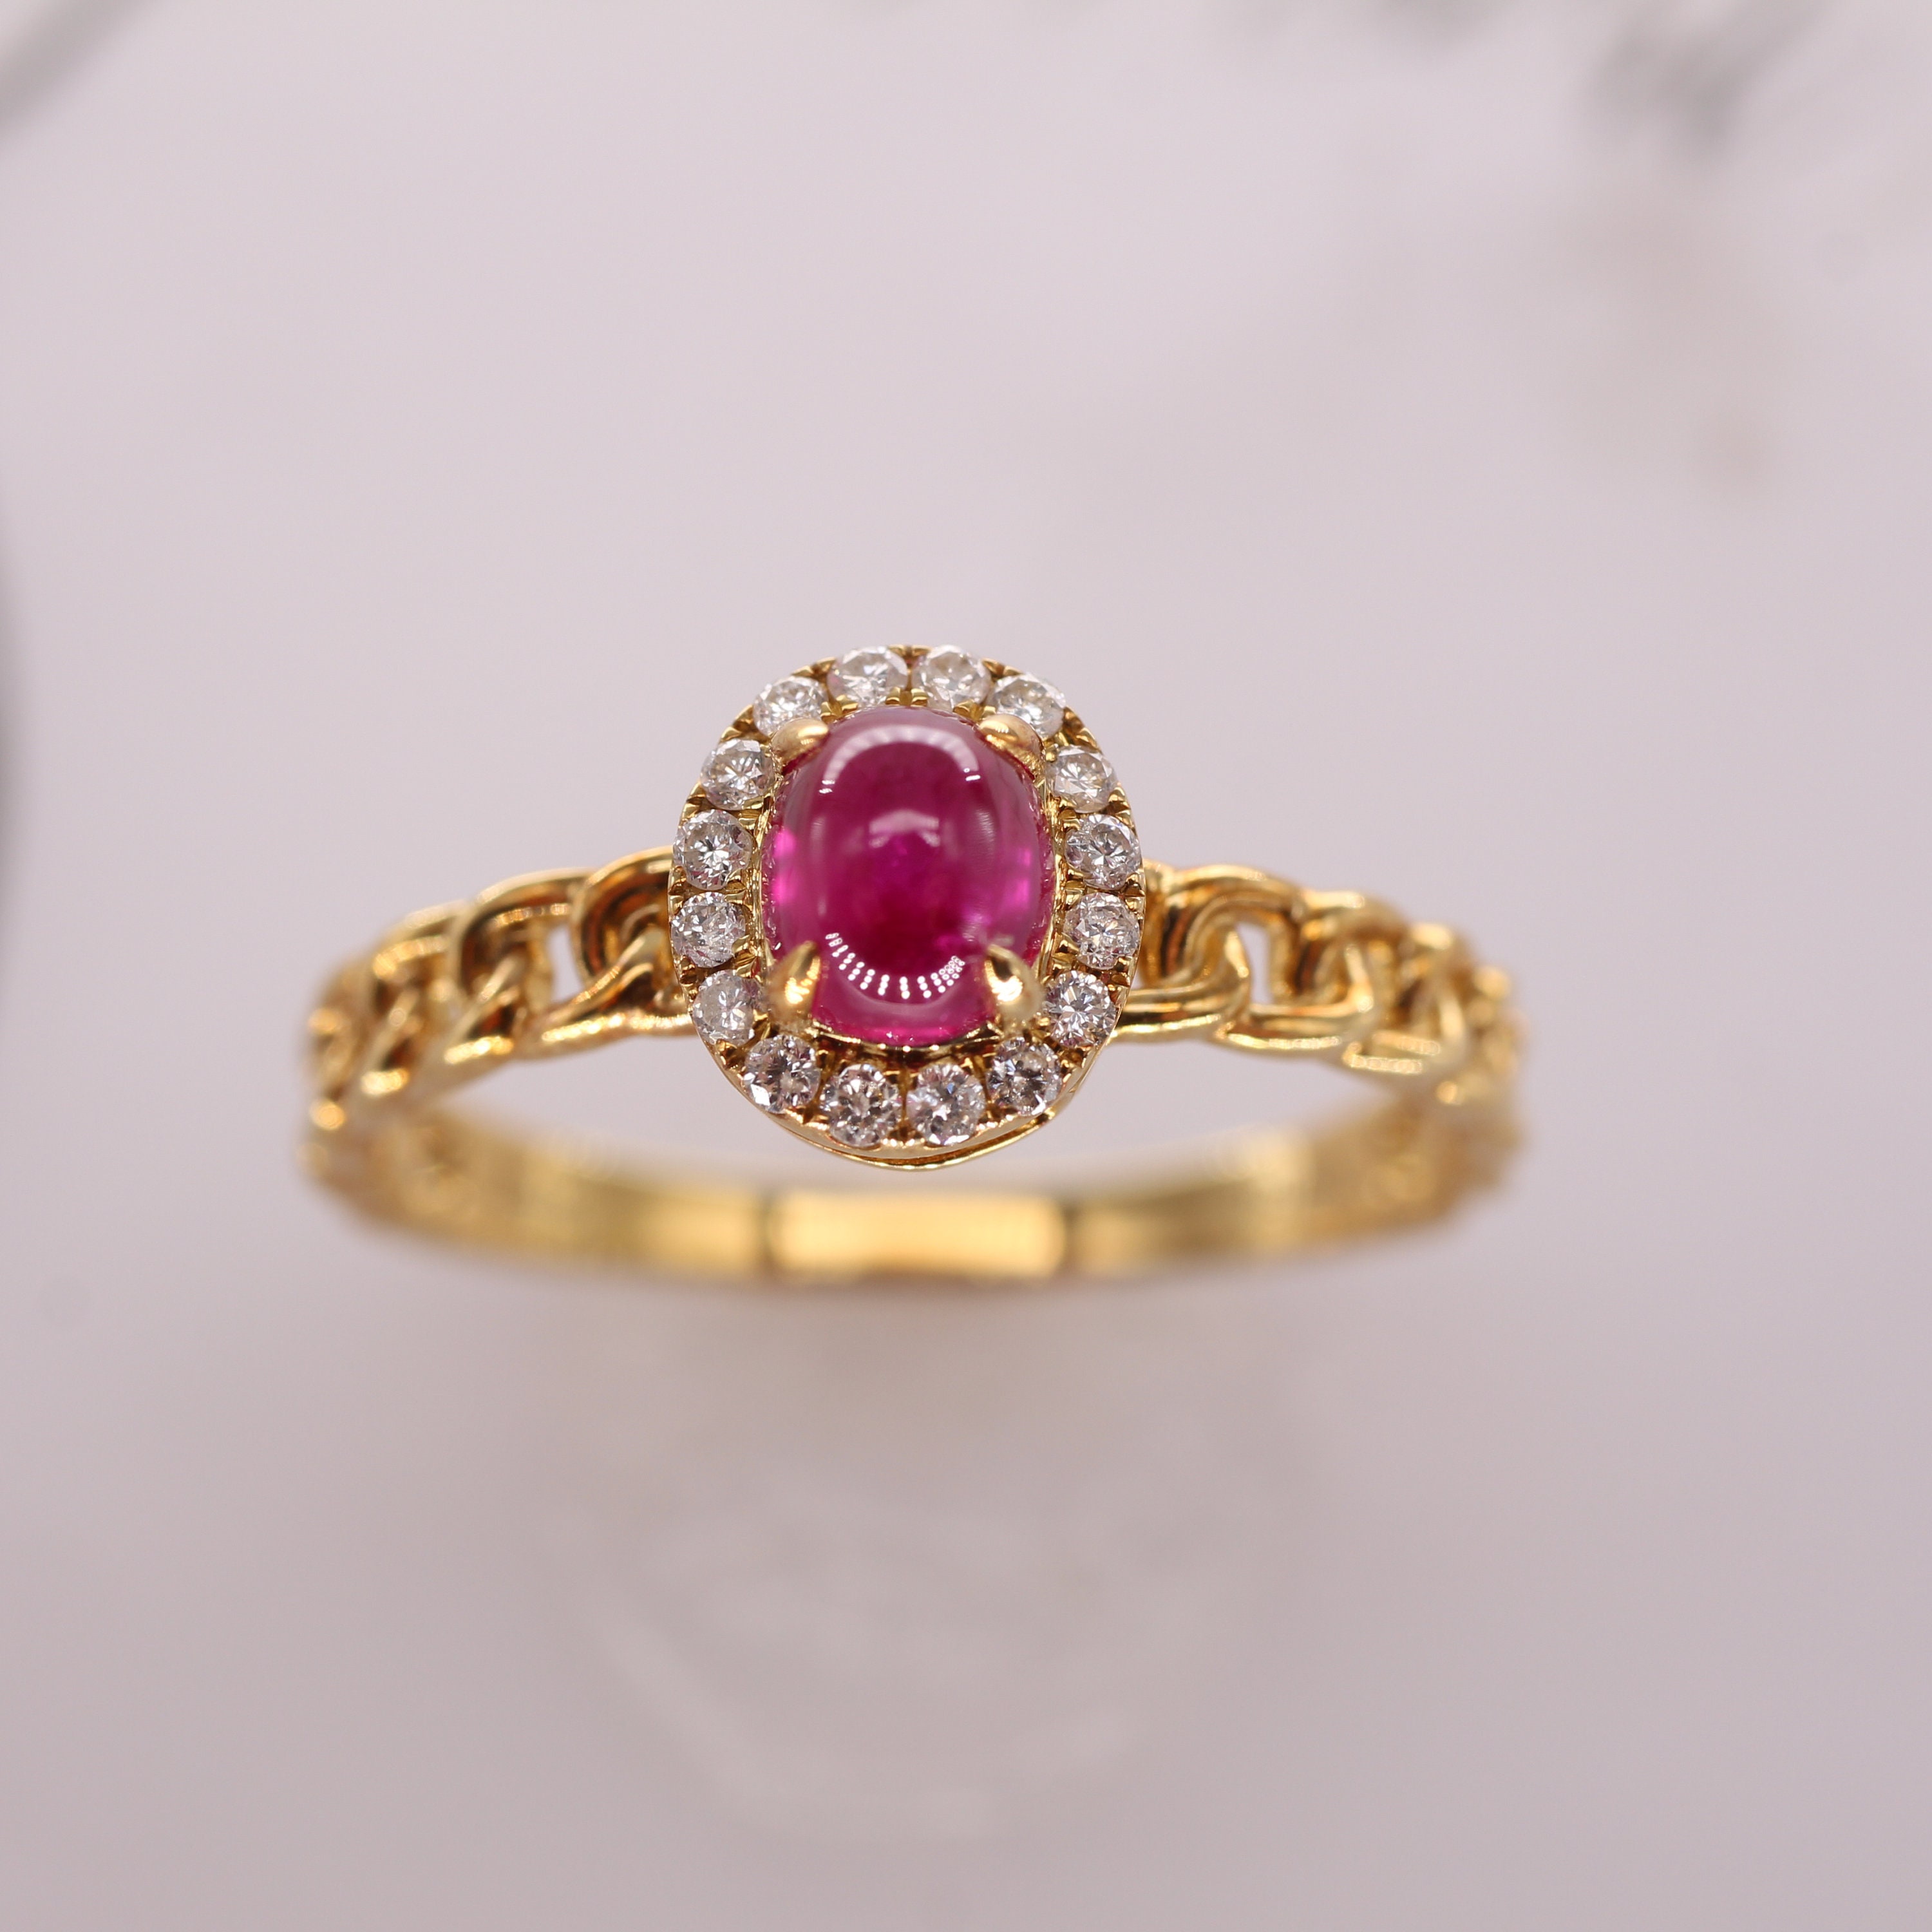 Women's Party Diamond Ring with Ruby at Rs 85000 in Mumbai | ID: 21272213397